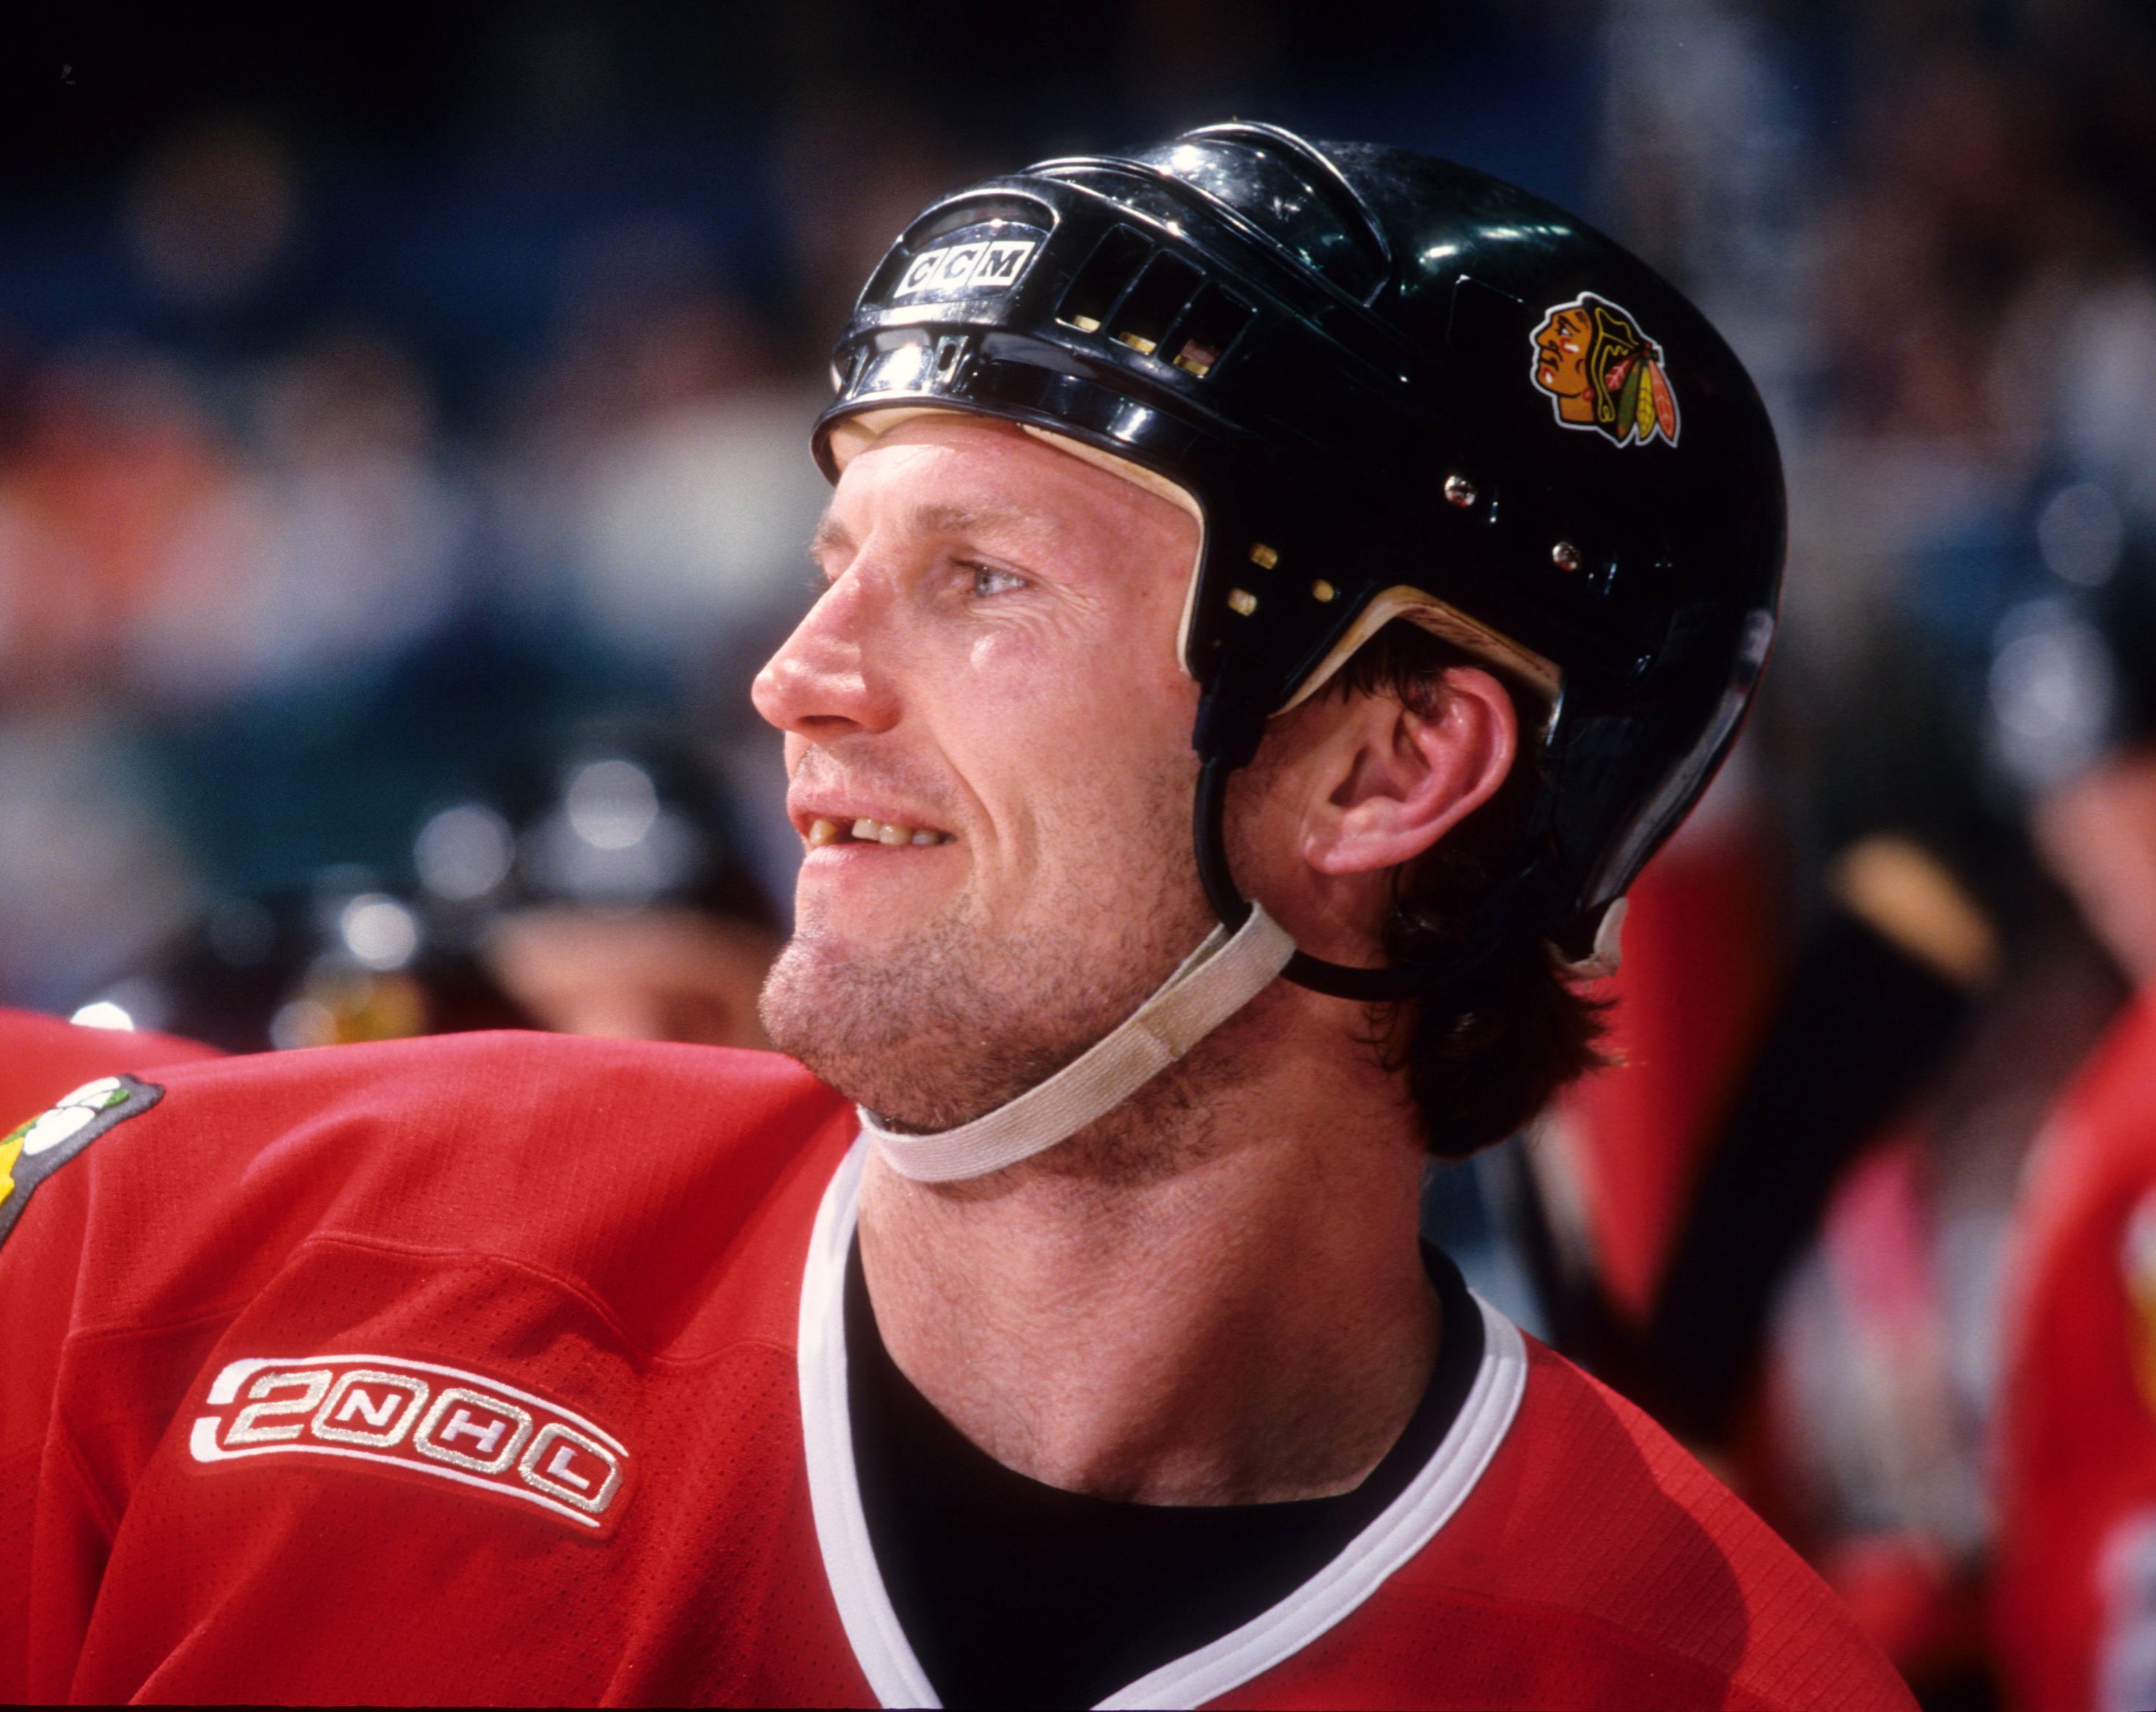 Former Detroit Red Wings and Chicago Blackhawks star Bob Probert died tragically in 2010.Former Detroit Red Wings and Chicago Blackhawks star Bob Probert died tragically in 2010.